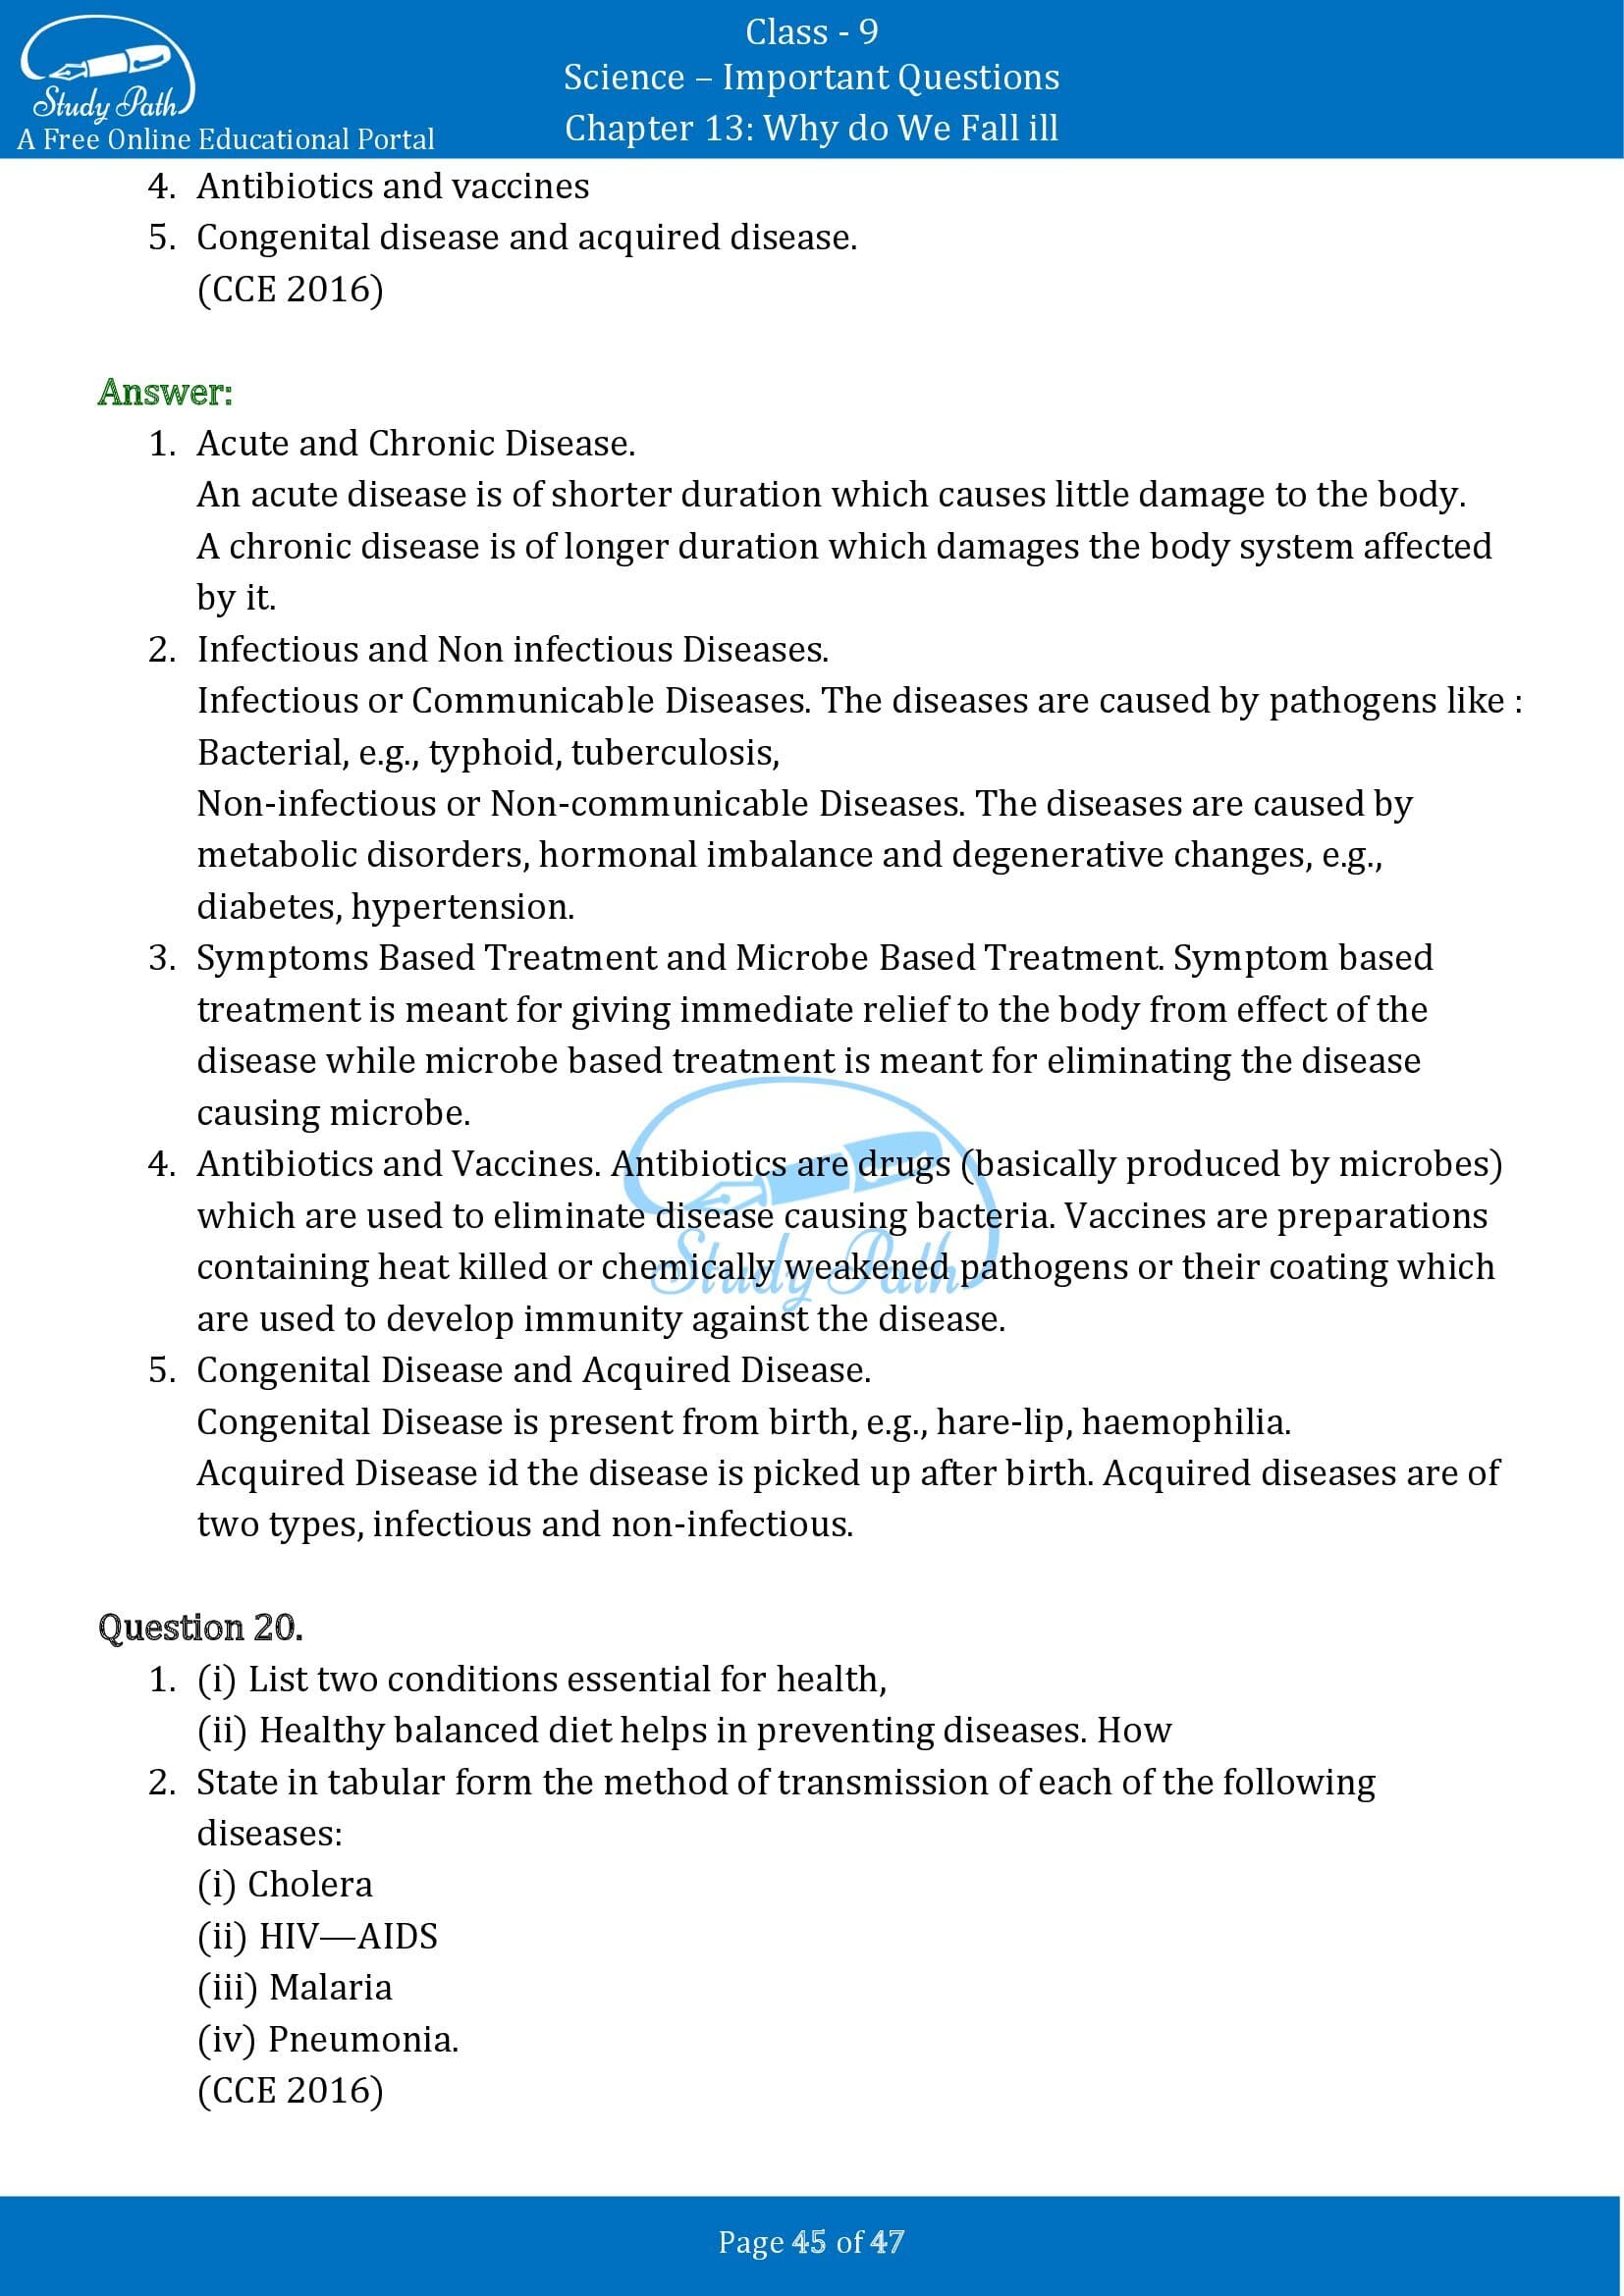 Important Questions for Class 9 Science Chapter 13 Why do We Fall ill 00045